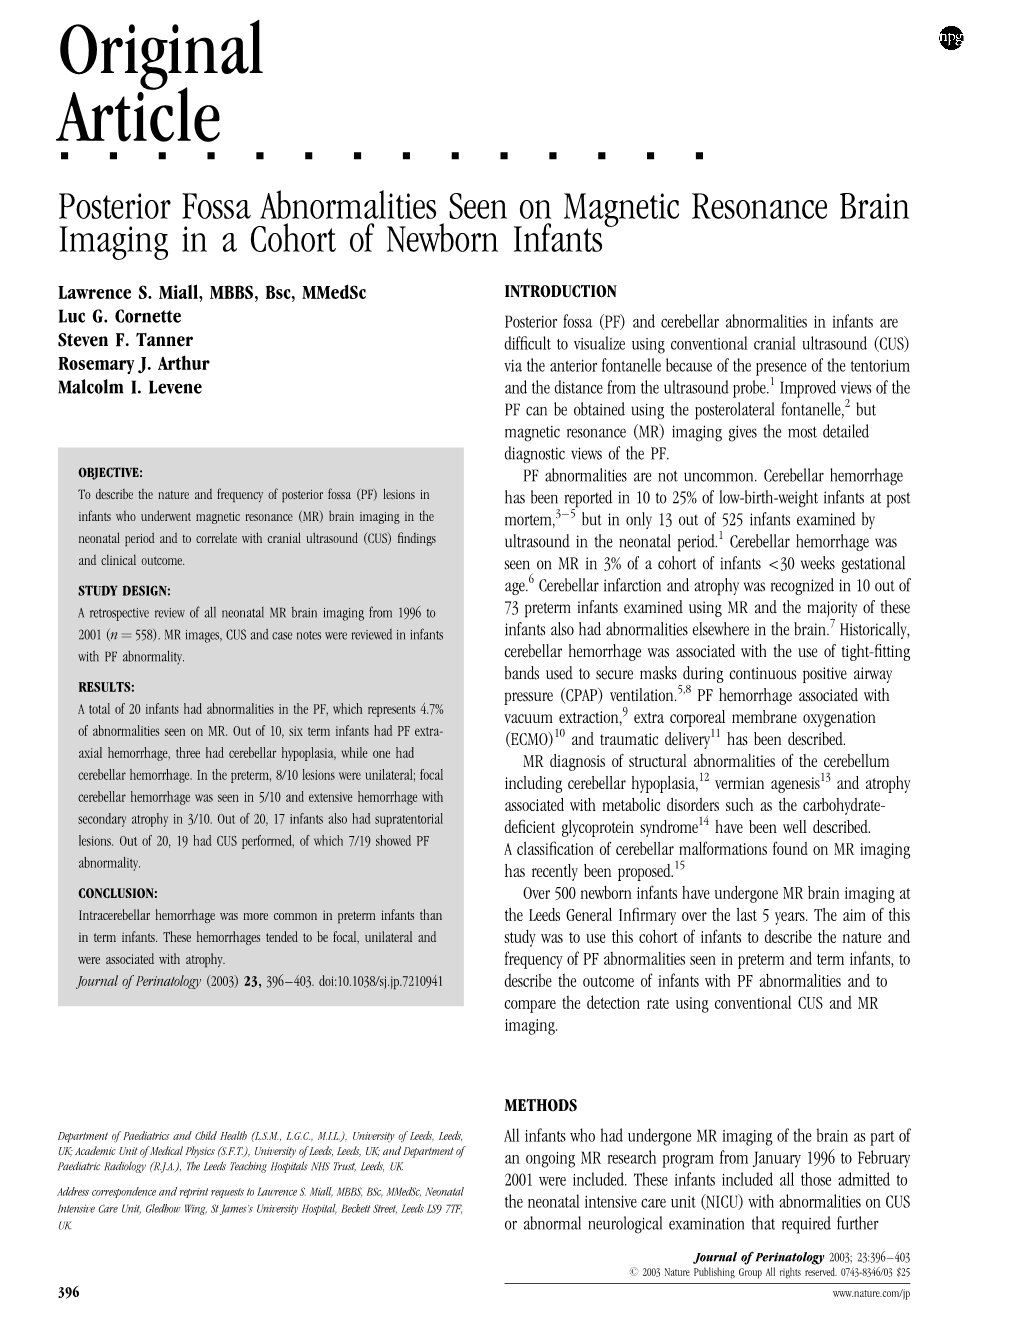 Posterior Fossa Abnormalities Seen on Magnetic Resonance Brain Imaging in a Cohort of Newborn Infants